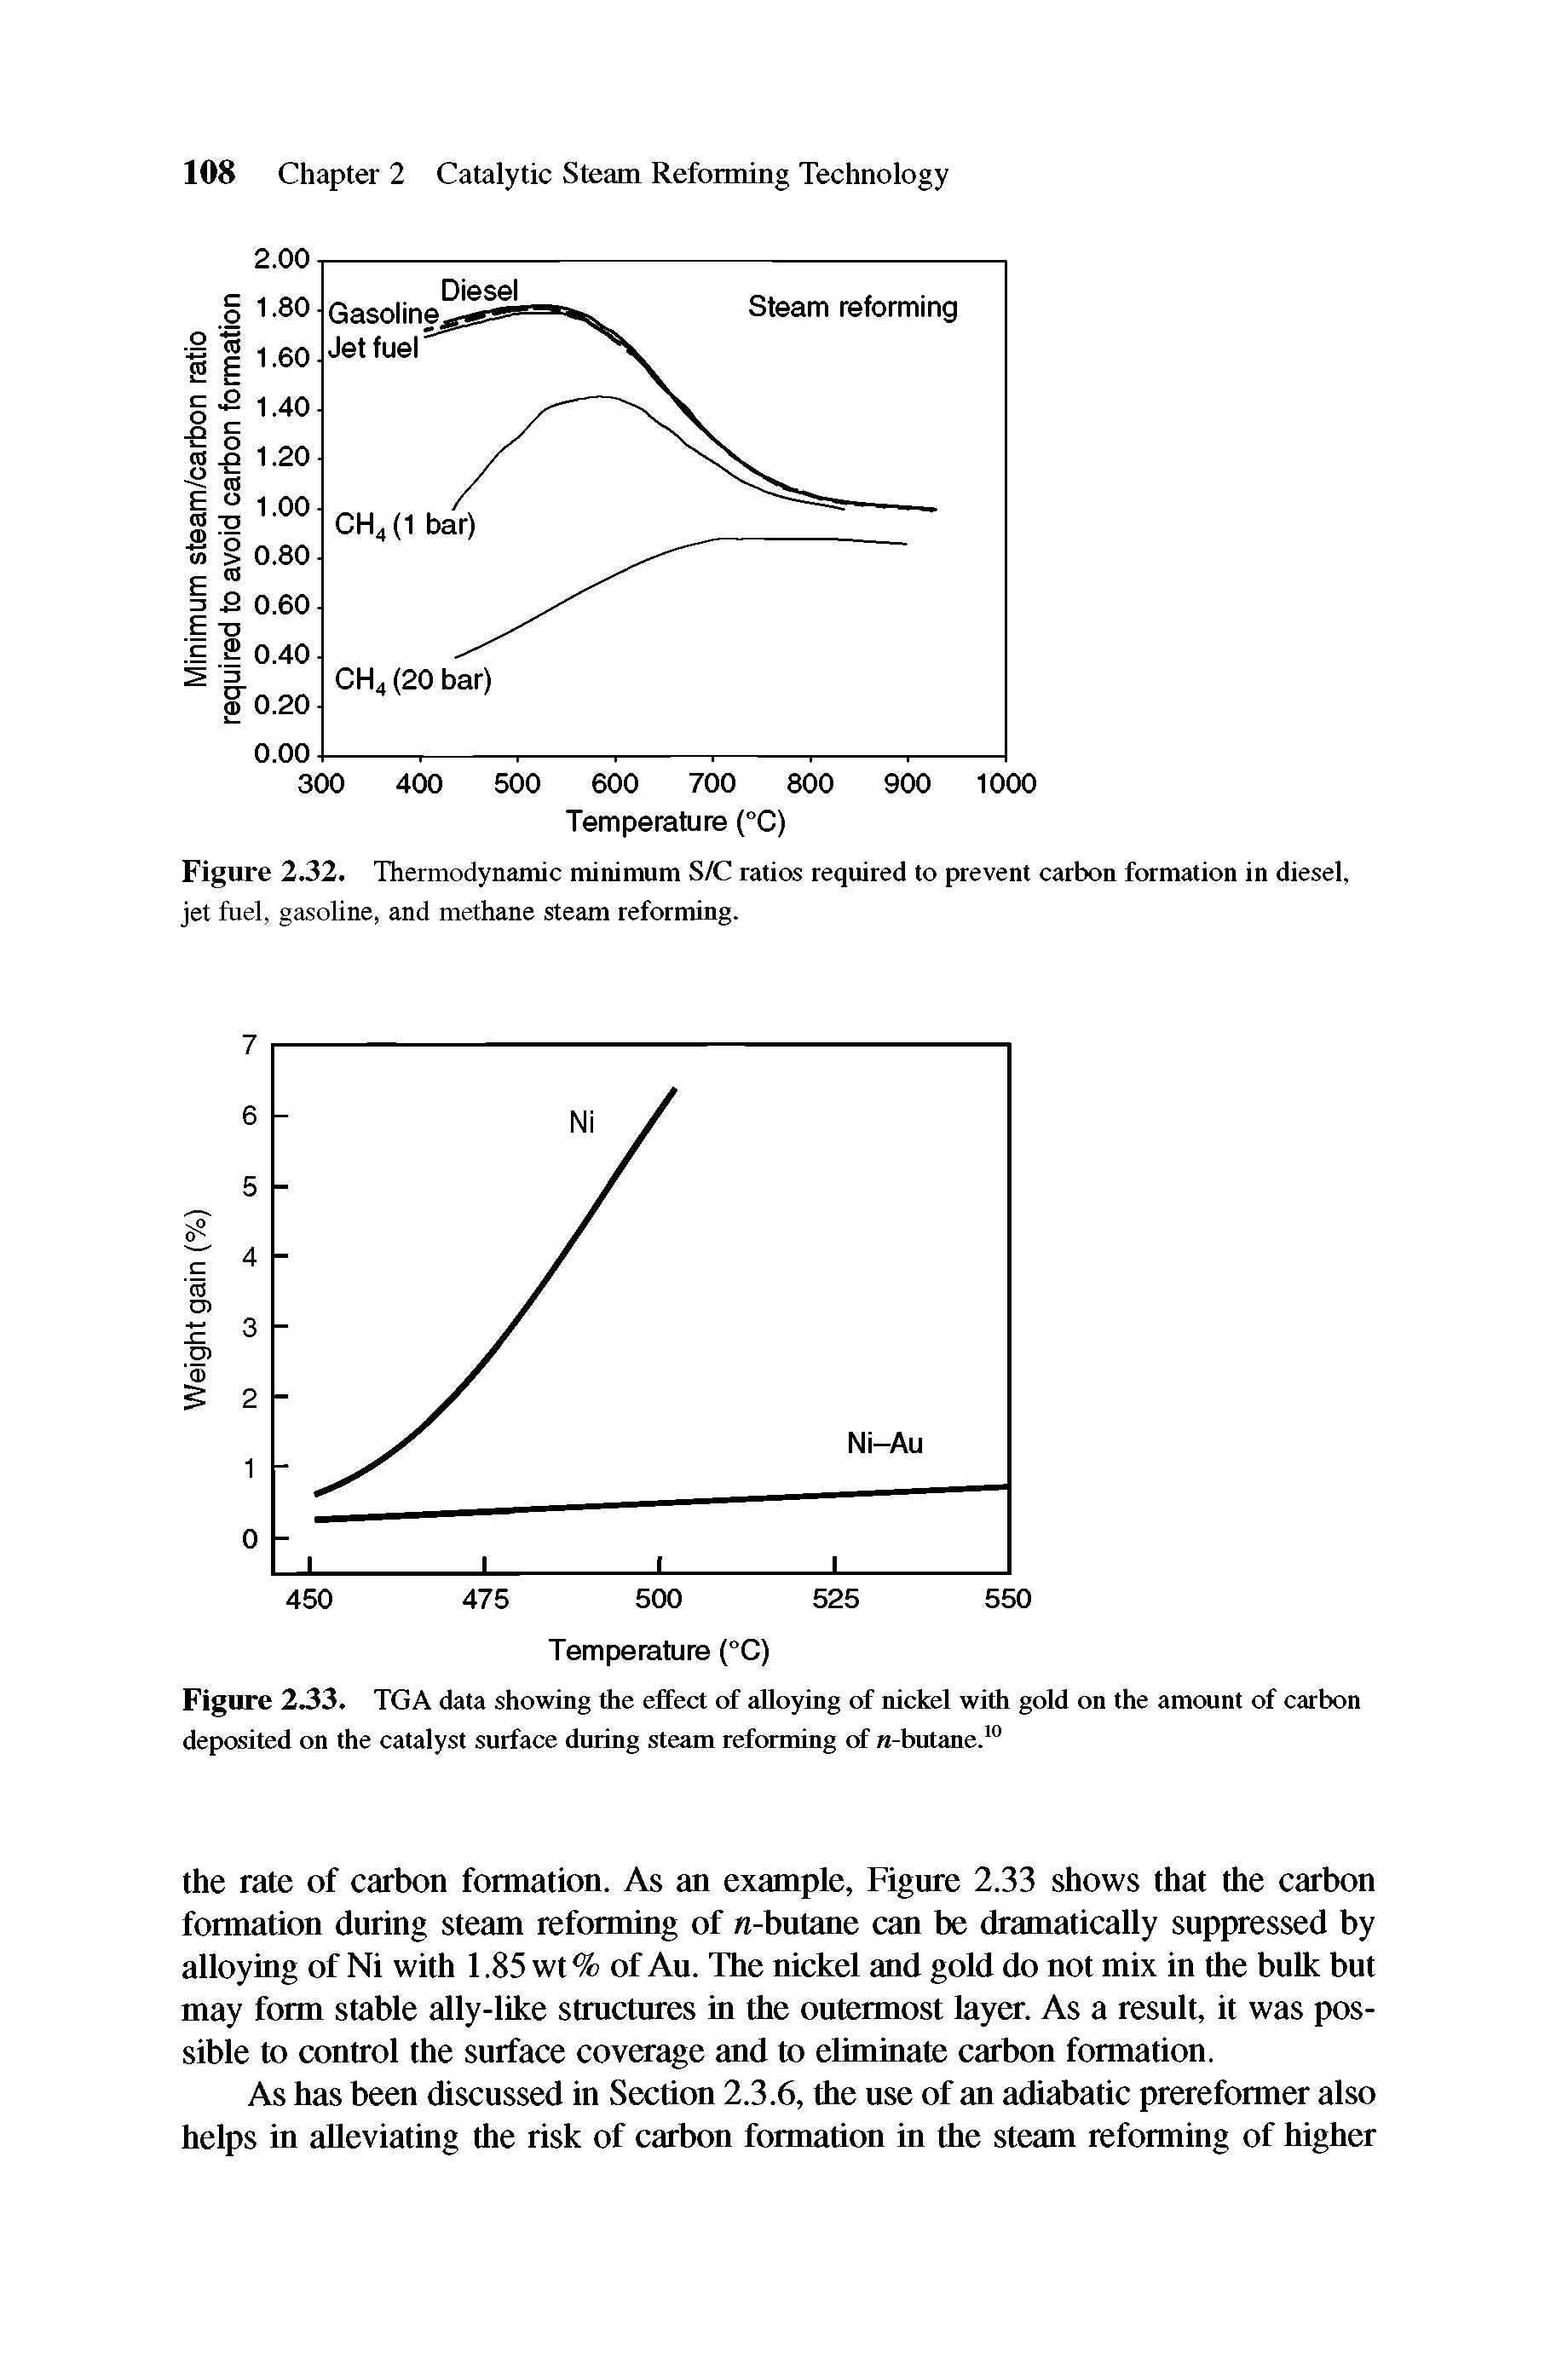 Figure 2.32. Thermodynamic minimum S/C ratios required to prevent carbon formation in diesel, jet fuel, gasoline, and methane steam reforming.